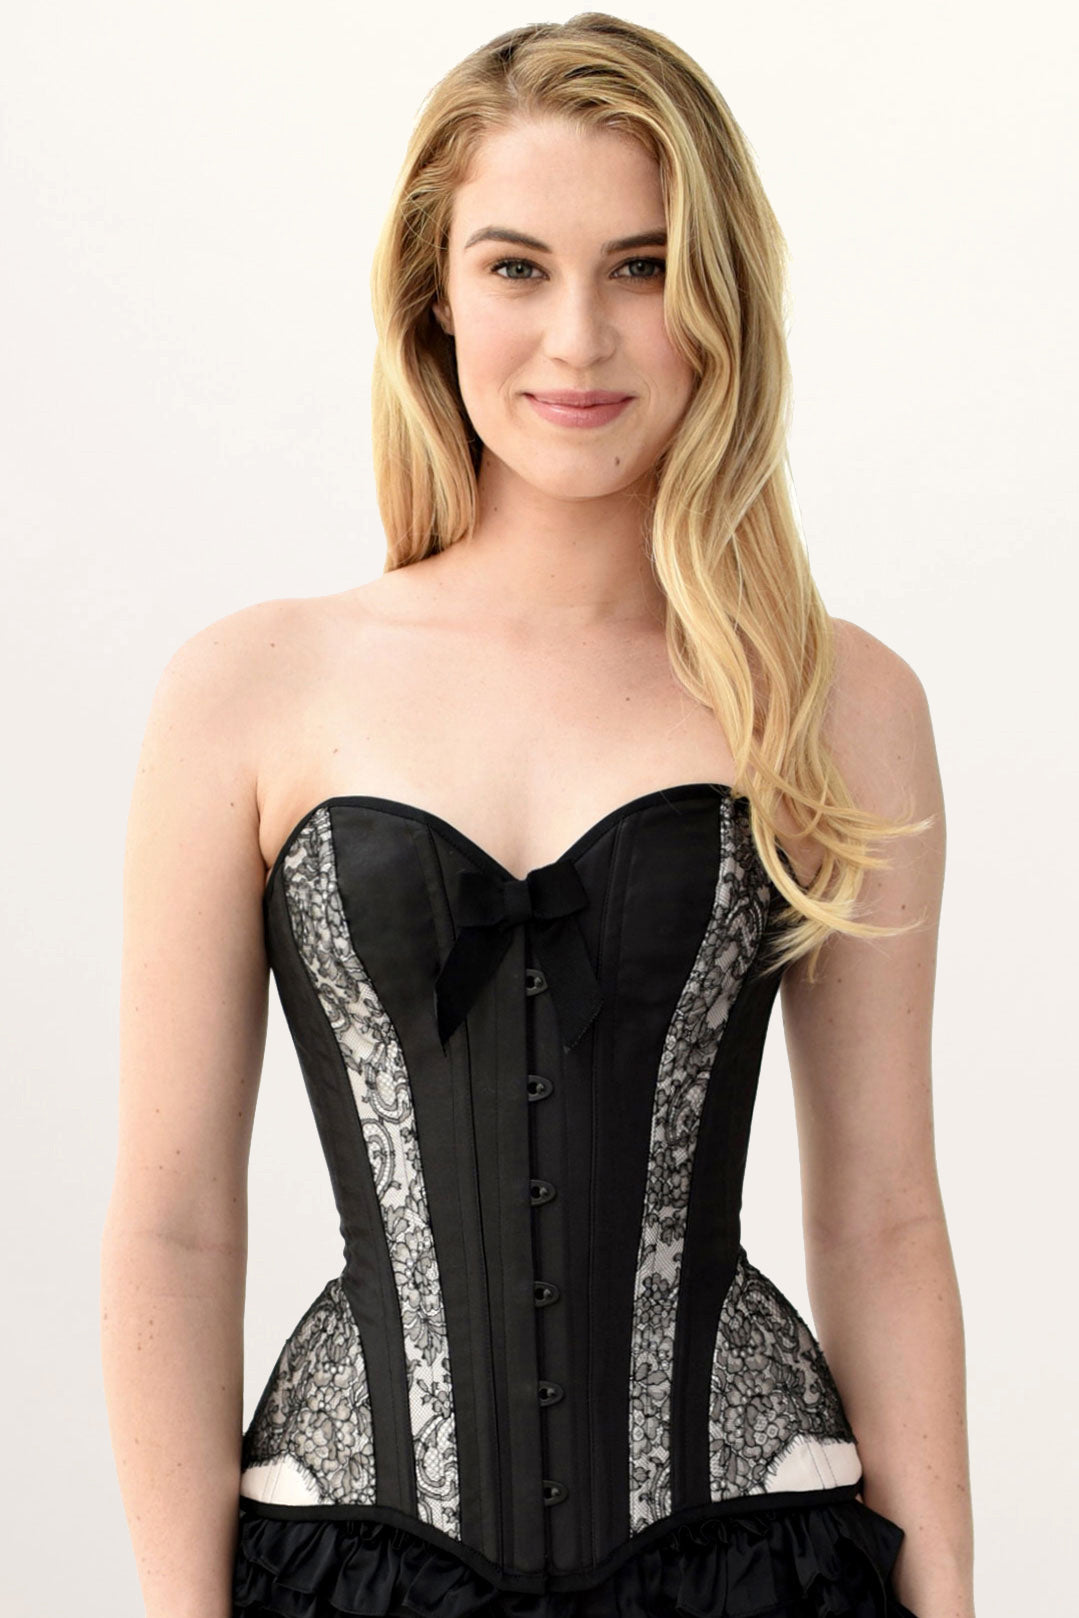 PCW Pure One Corset Works // Half Cup Corset Victorian: All Black